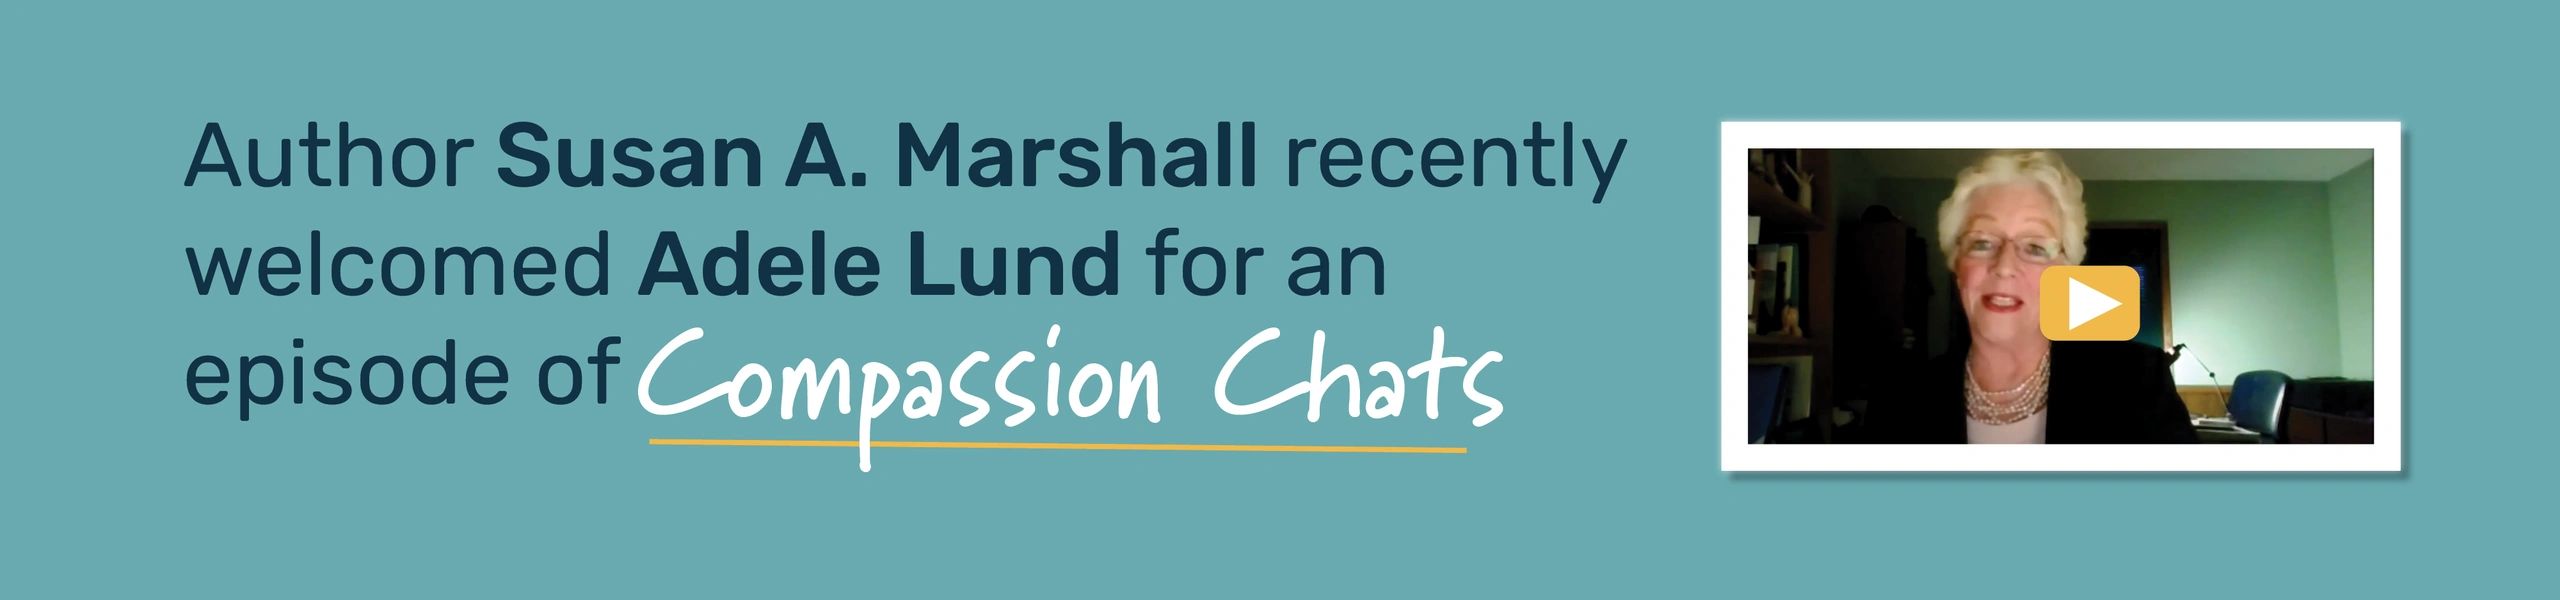 Author Susan A. Marshall recently welcomed Adele Lund as a guest on her podcast Compassion Chats